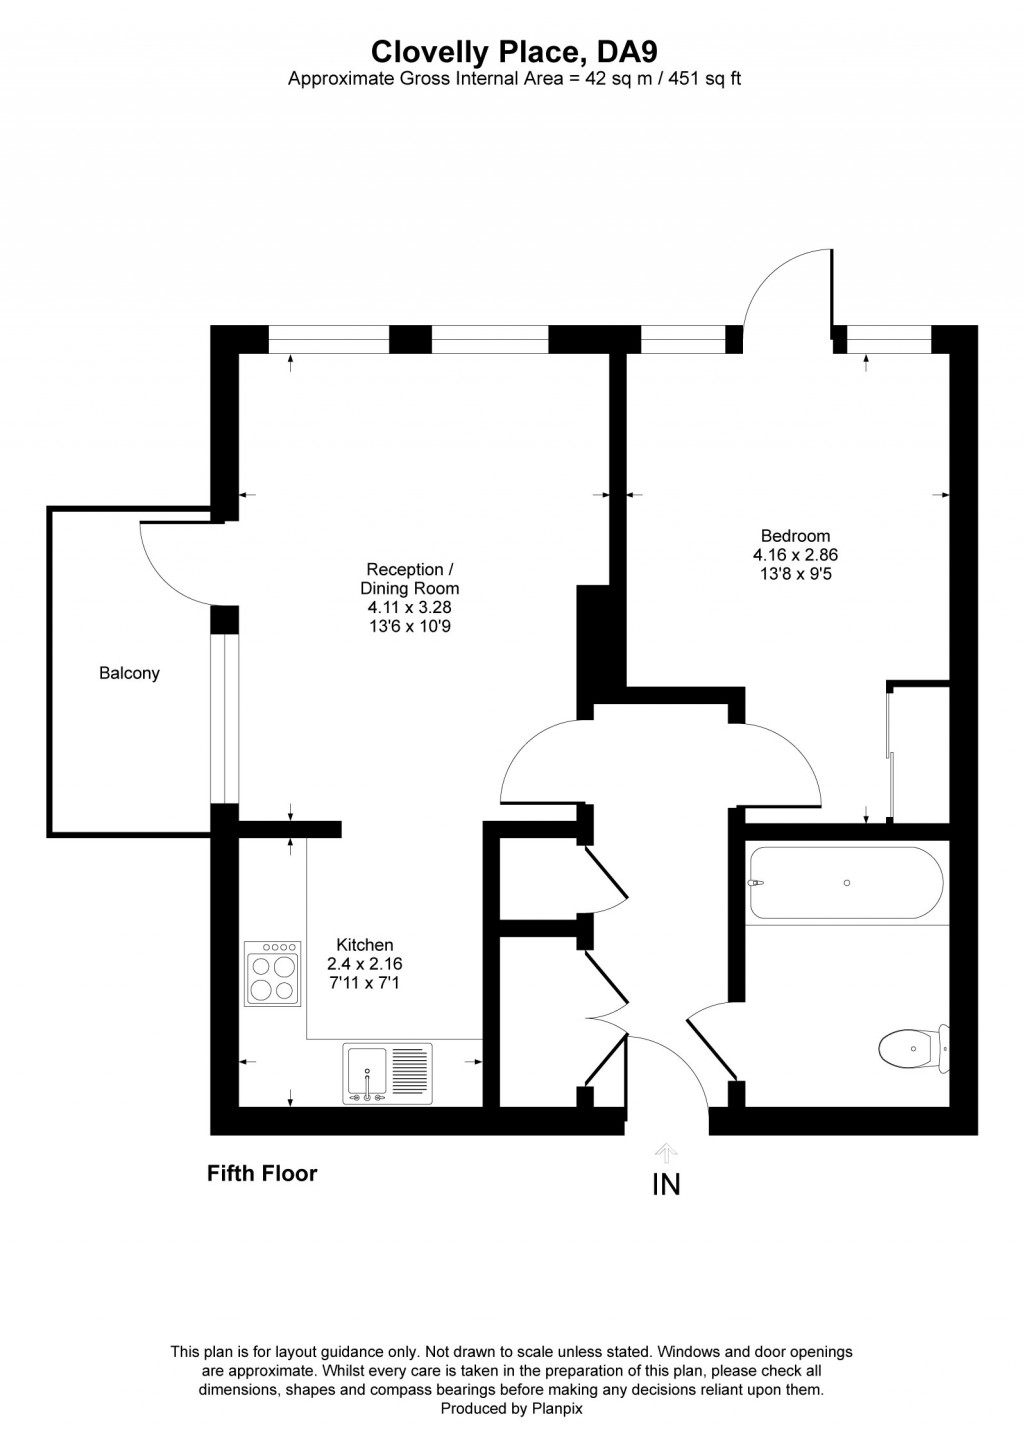 Floorplans For Darbyshire House, Clovelly Place, Greenhithe